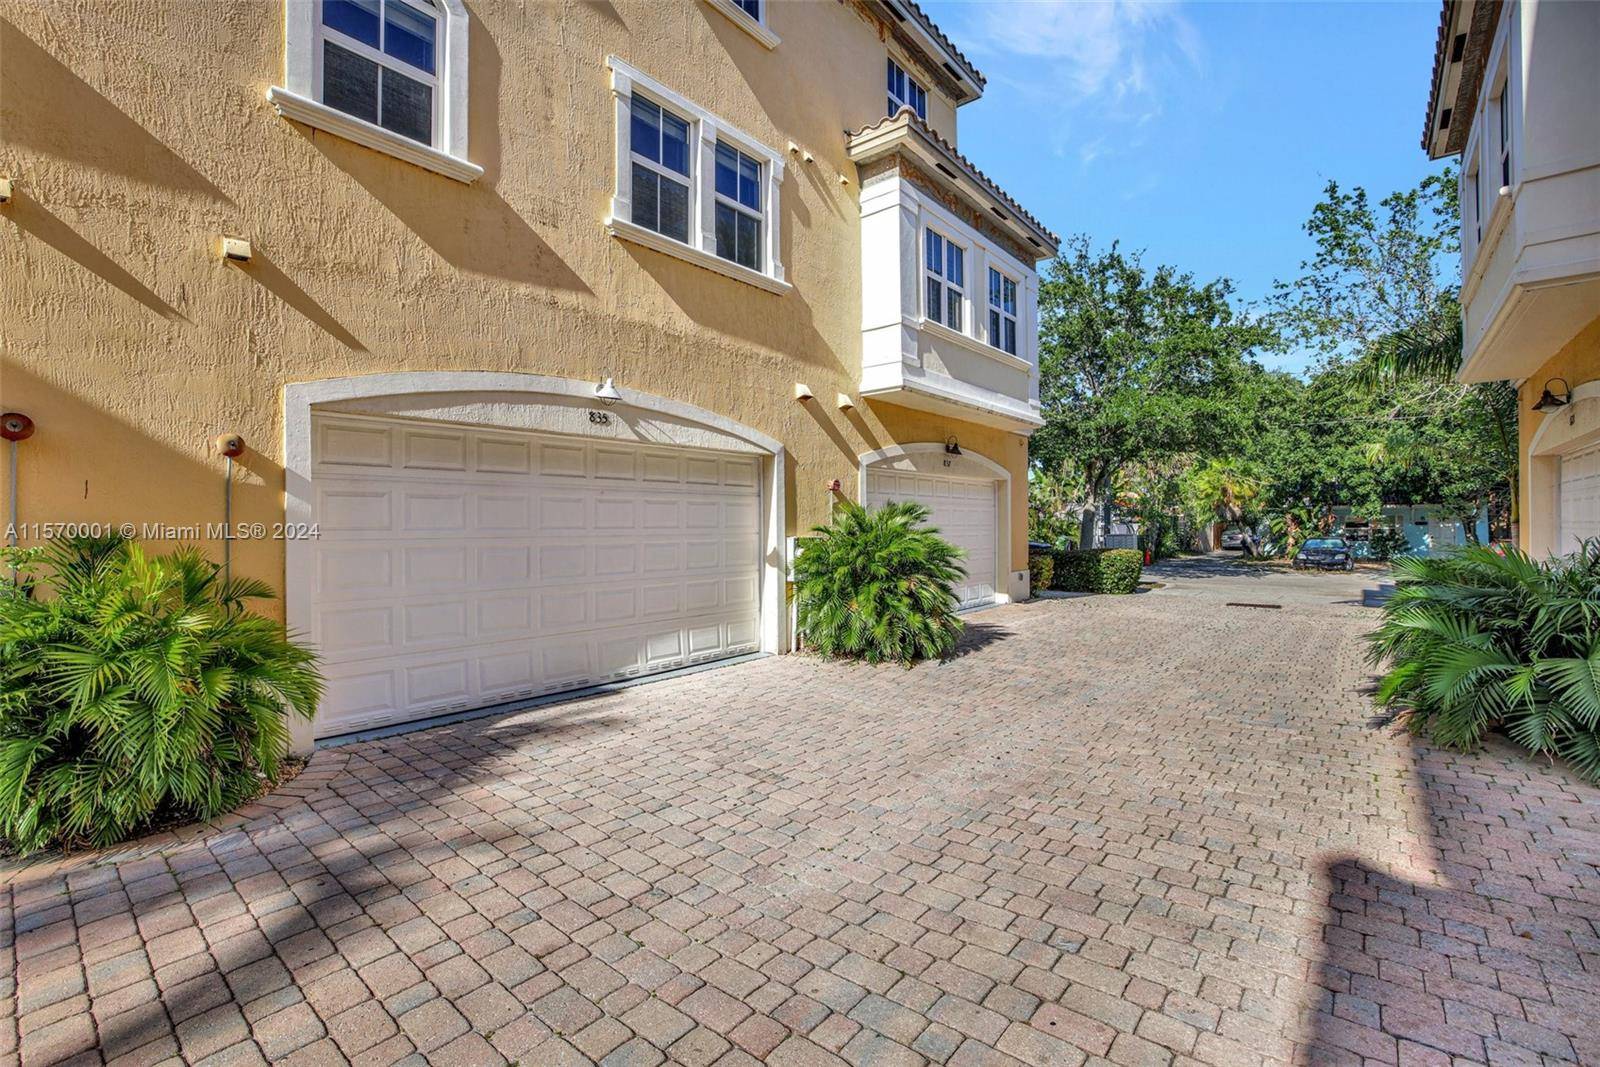 Charming, spacious four bedroom Townhome in the heart of Victoria Park only minutes from Las Olas.